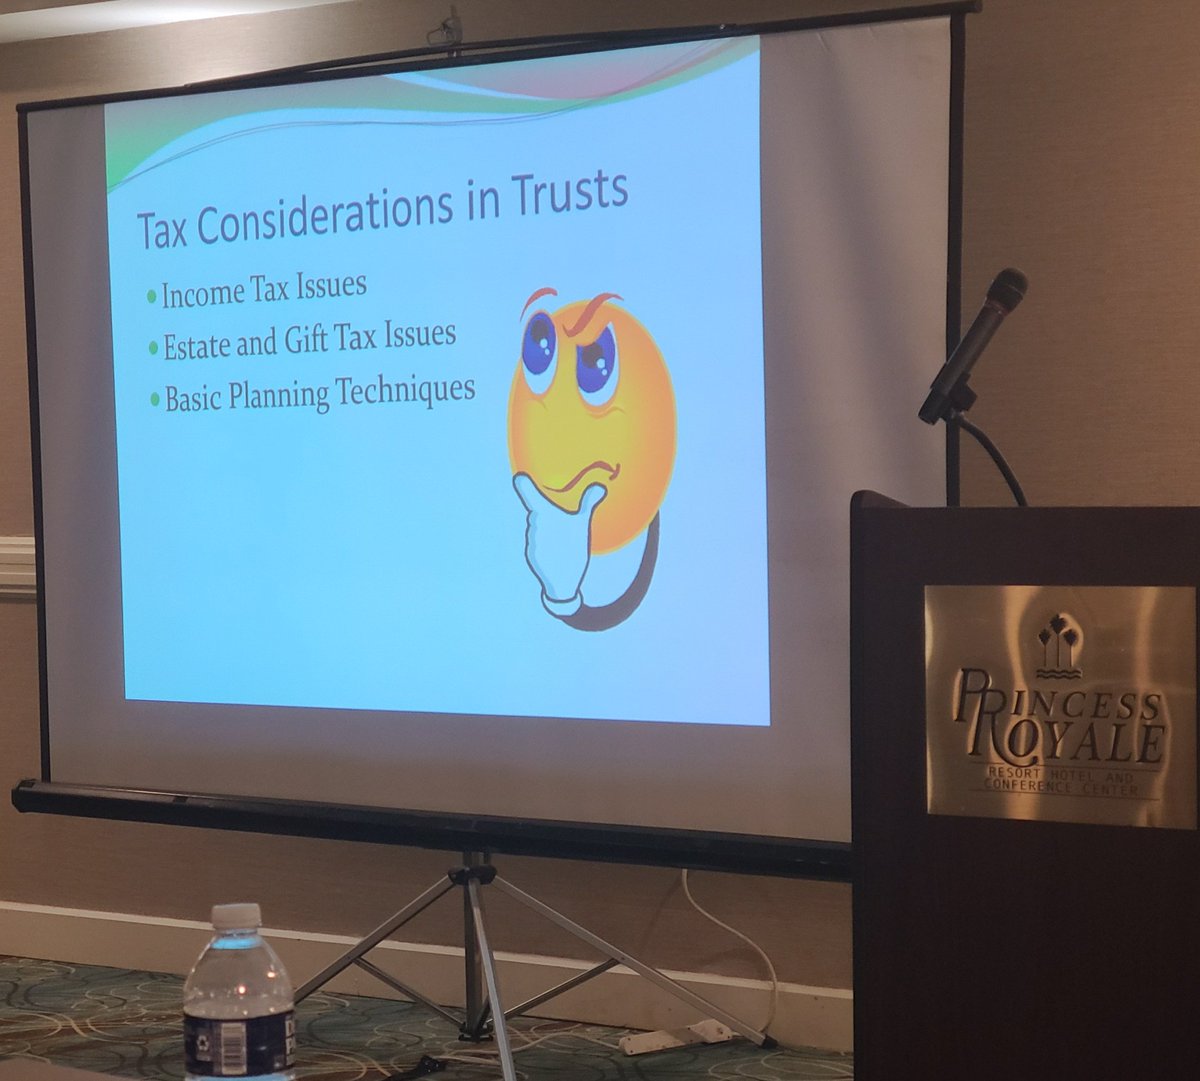 Learning the basics of trusts and trust taxation with Art Werner @MACPA Beach retreat #BeachCPE